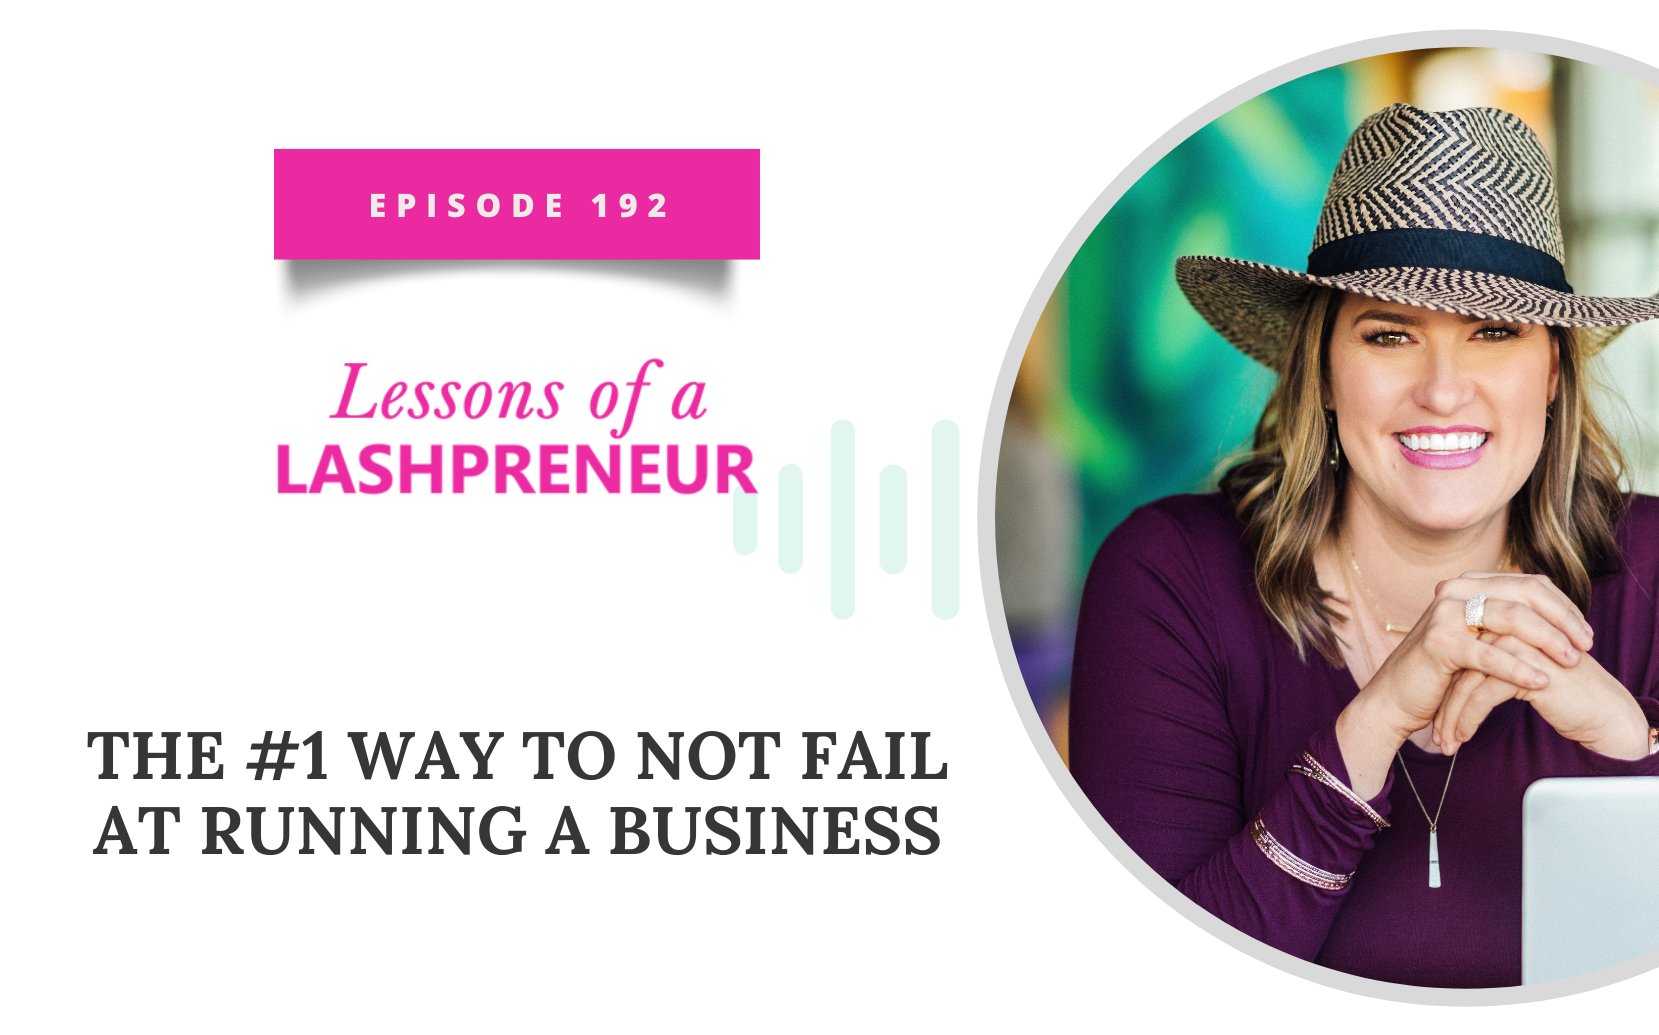 The #1 Way to Not Fail at Running A Business